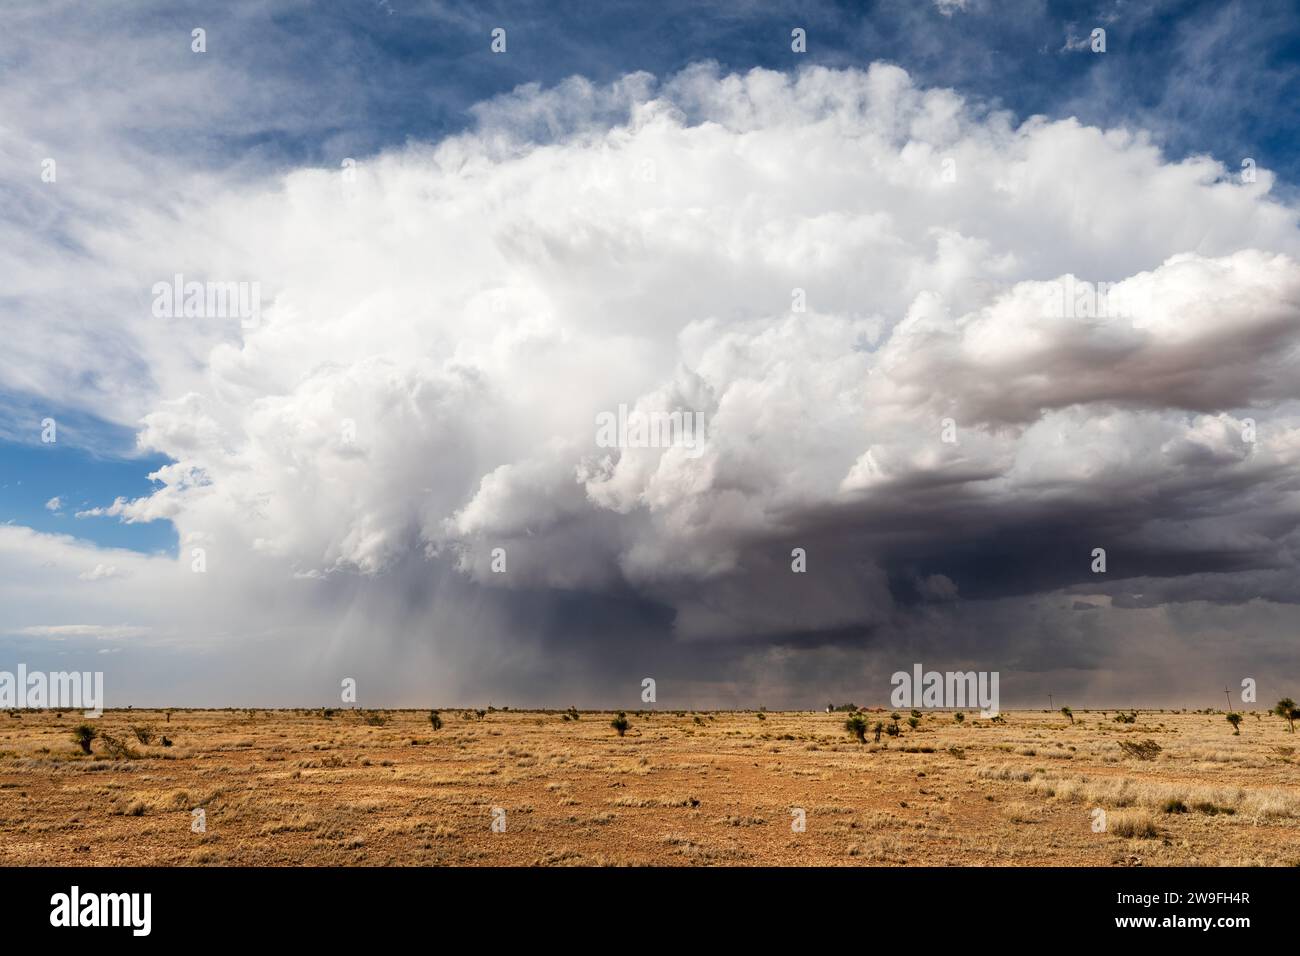 Supercell thunderstorm cumulonimbus with wall cloud near Roswell, New Mexico Stock Photo